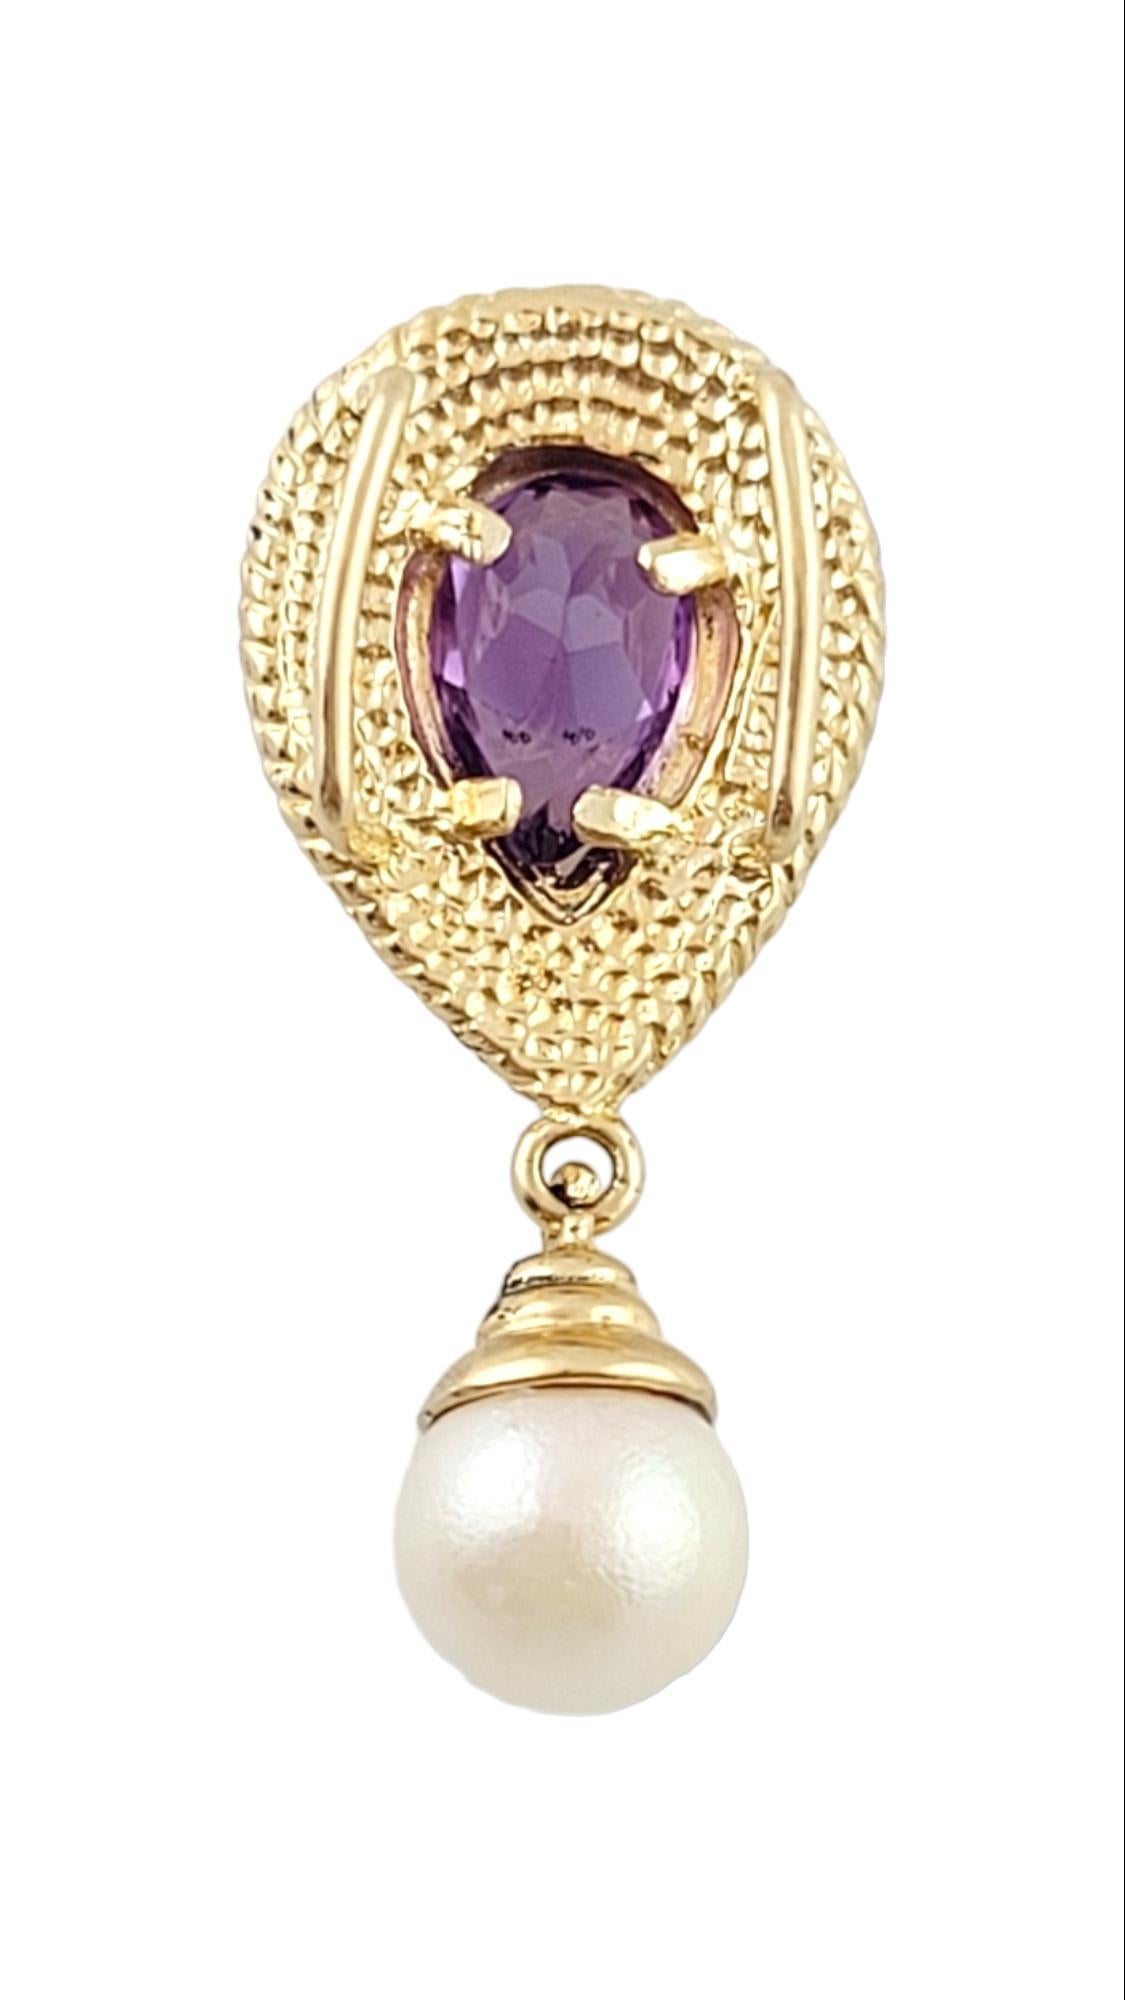 Pear Cut 14K Yellow Gold Amethyst and Pearl Pendant #15928 For Sale